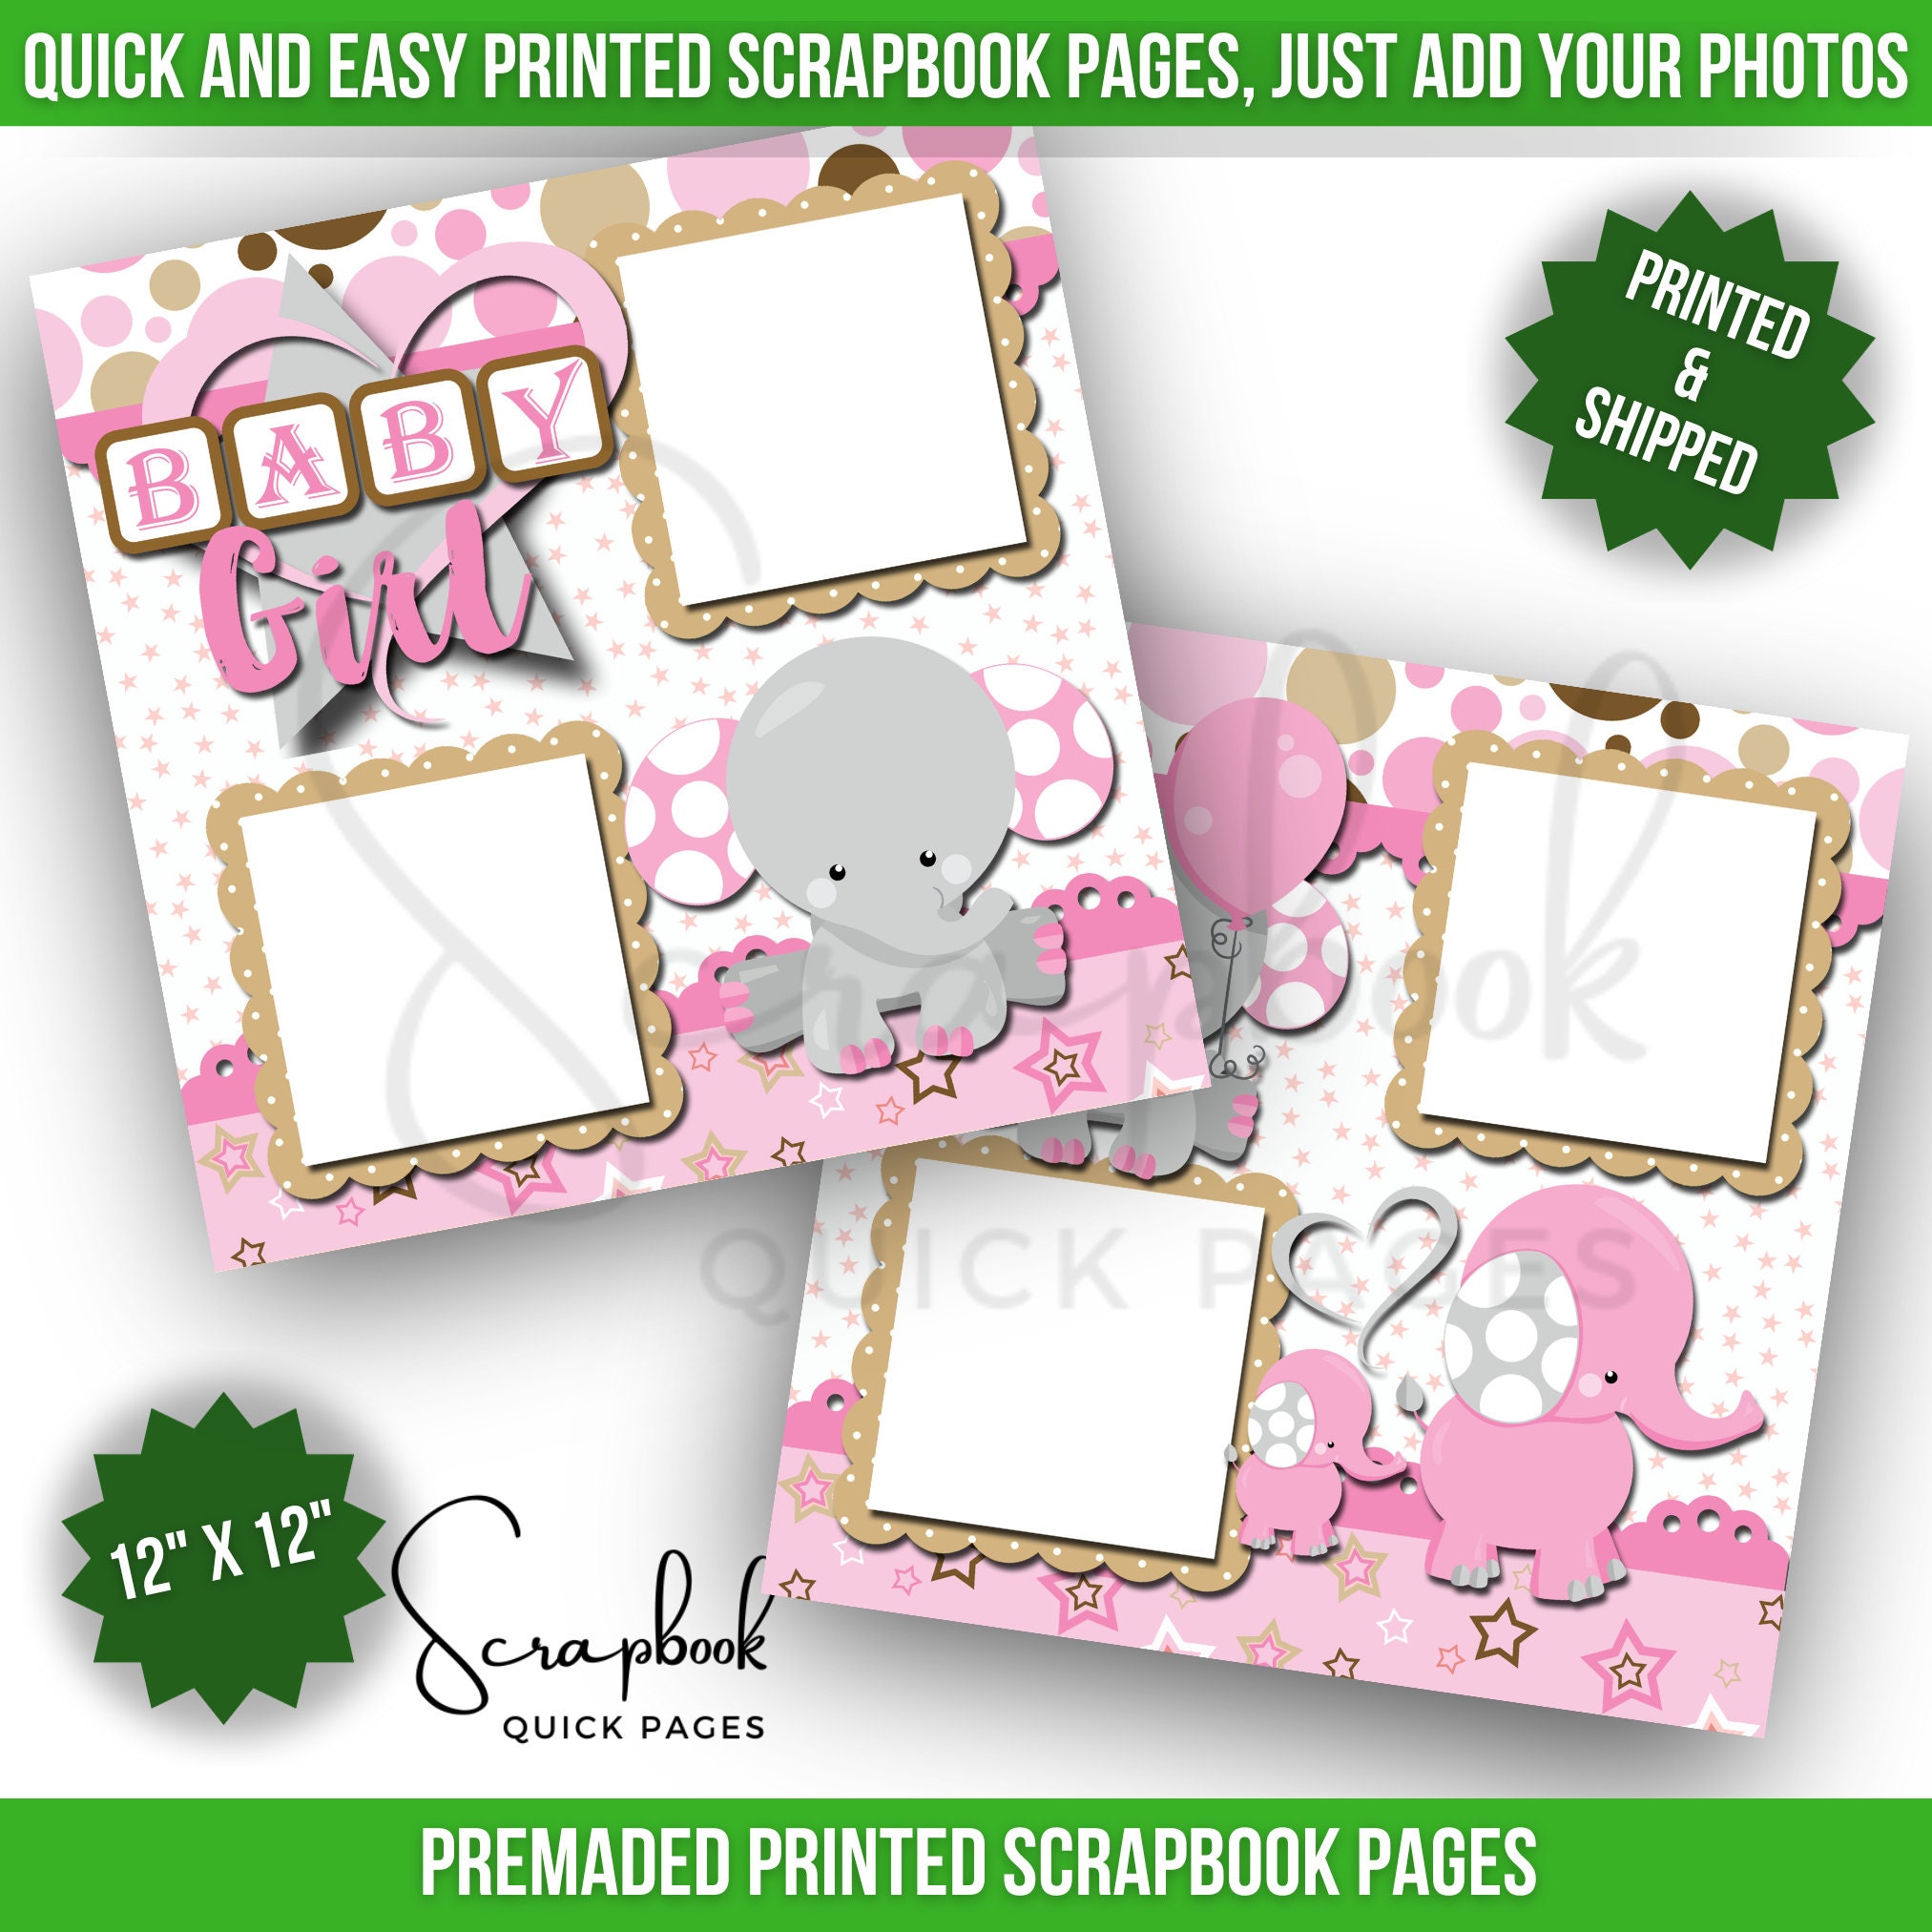 Baby Photo Album With Light Pink Pages, 12x12 Inch 60 Pages / 30 Sheets  Book Bound Baby Memory Album, Baby Girl Scrapbook, Baby Shower Album 